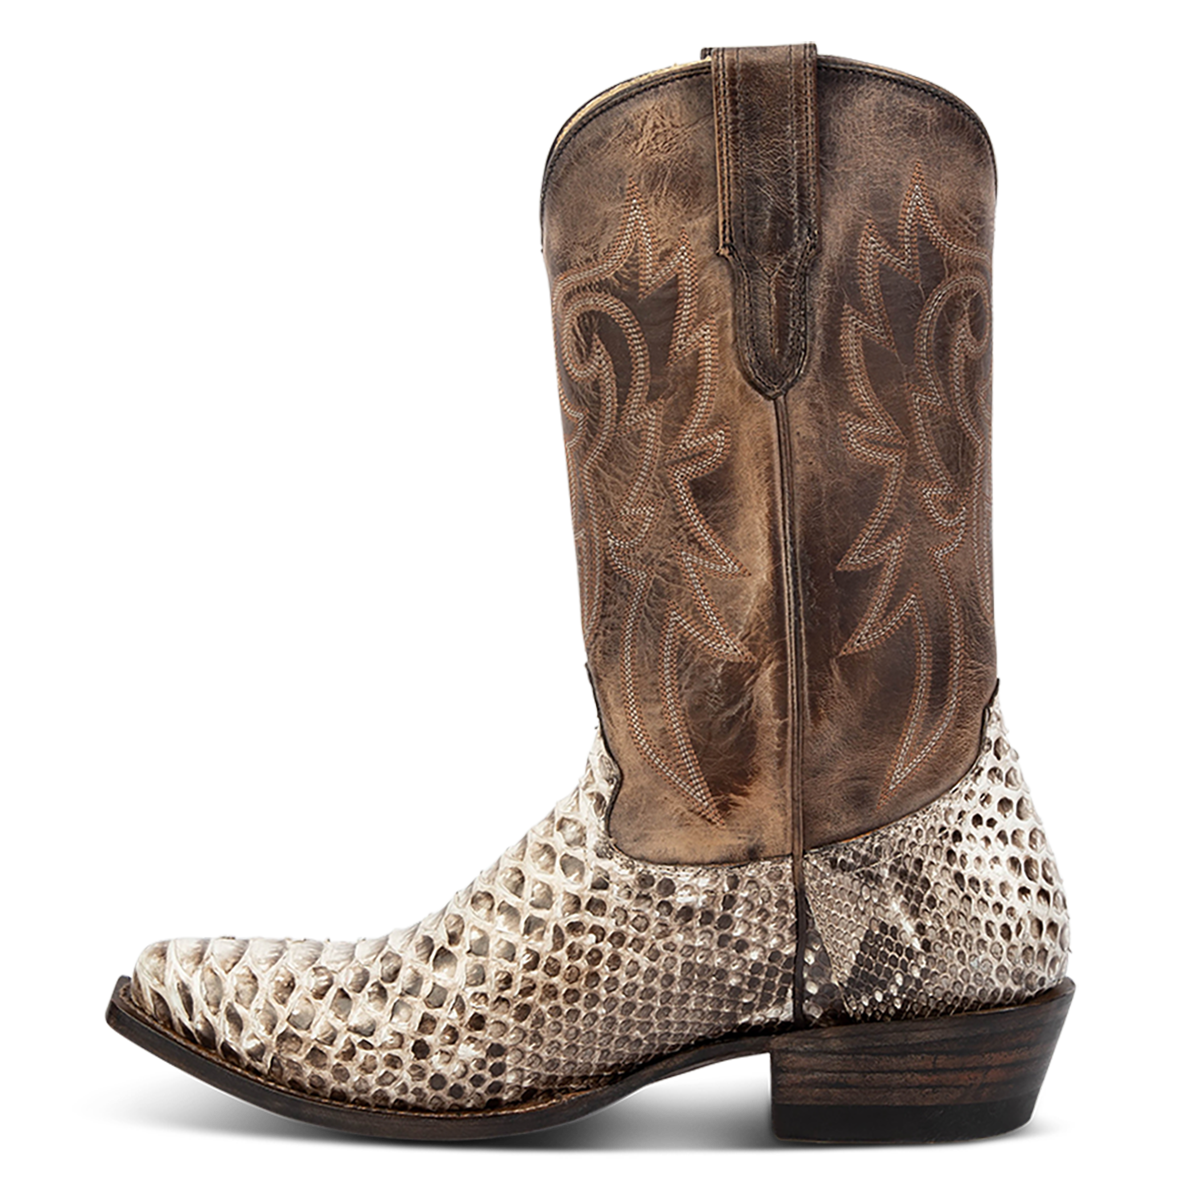 Inside view showing FREEBIRD men's Marshall grey python leather western cowboy boot with shaft stitch detailing, snip toe construction and leather pull straps